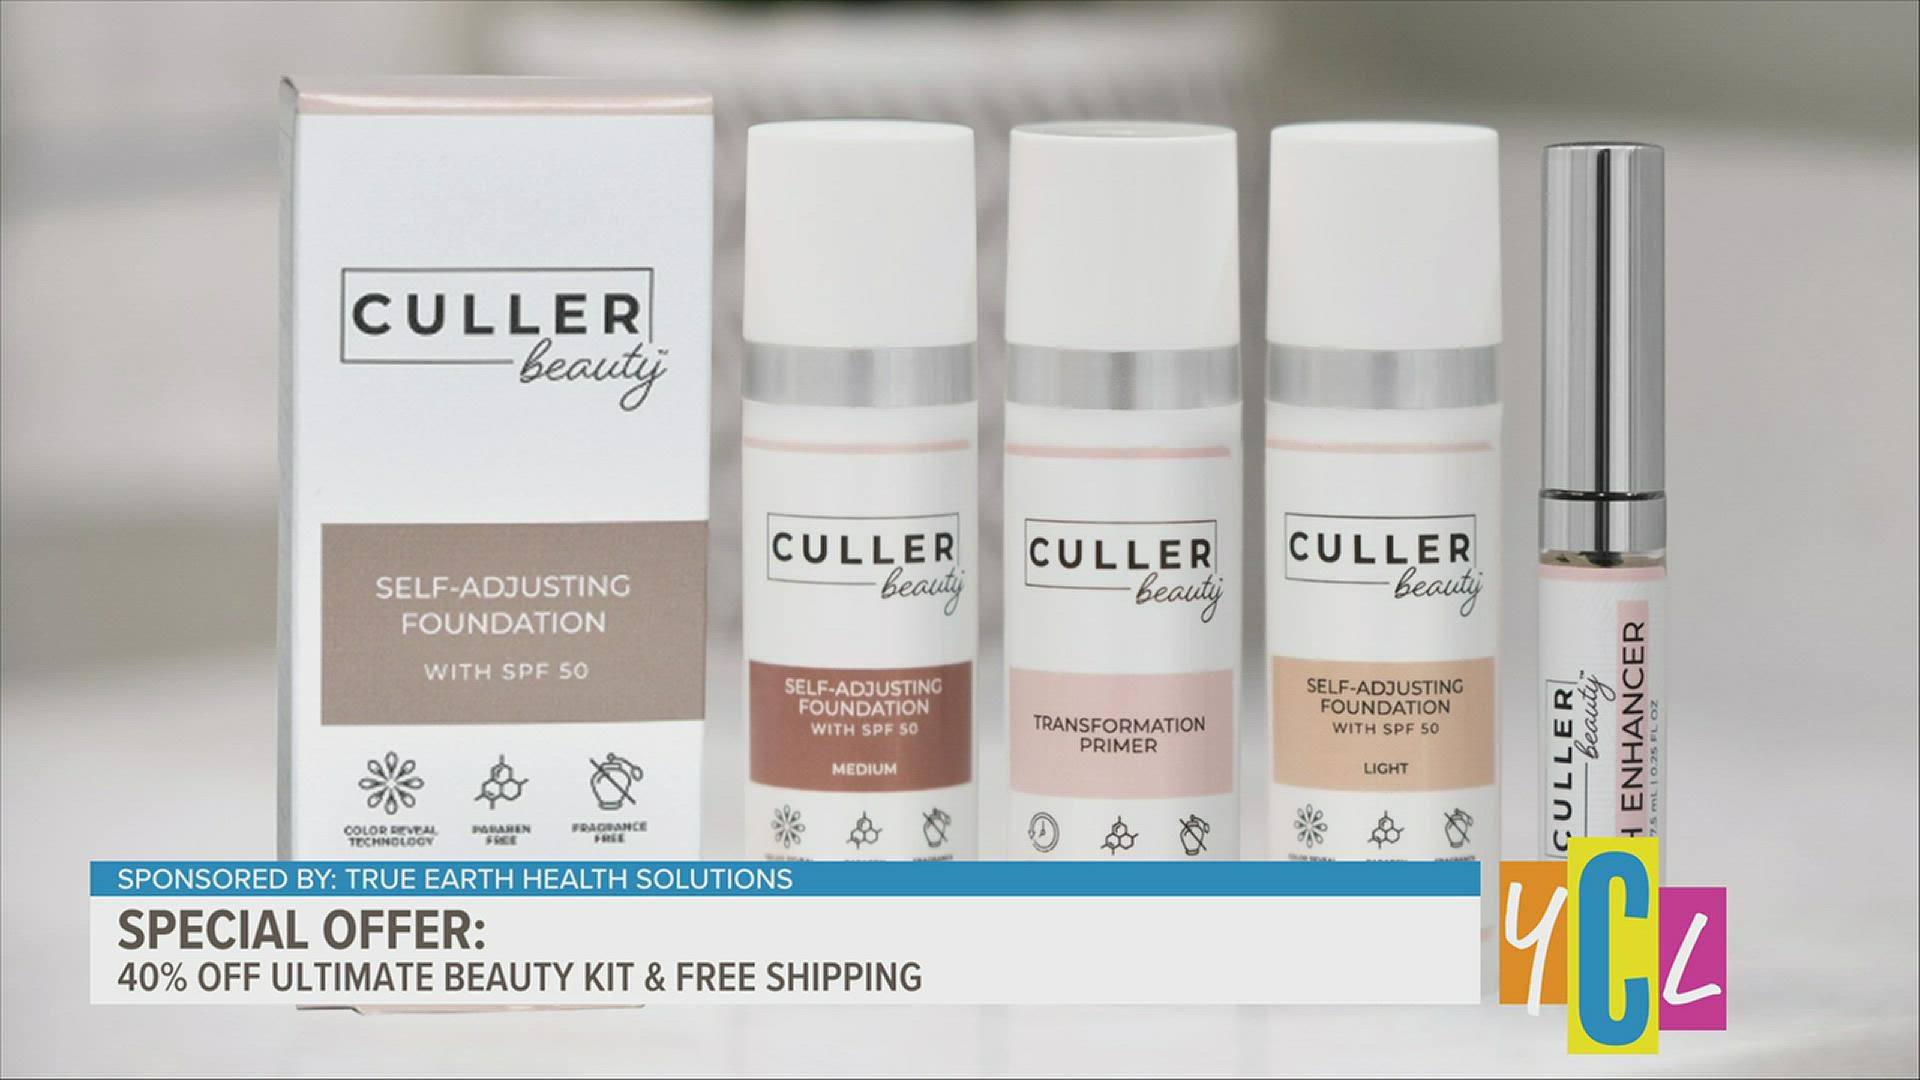 See how one foundation’s color reveal technology will save you time, money and aggravation. This segment paid for by True Earth Health Solutions.